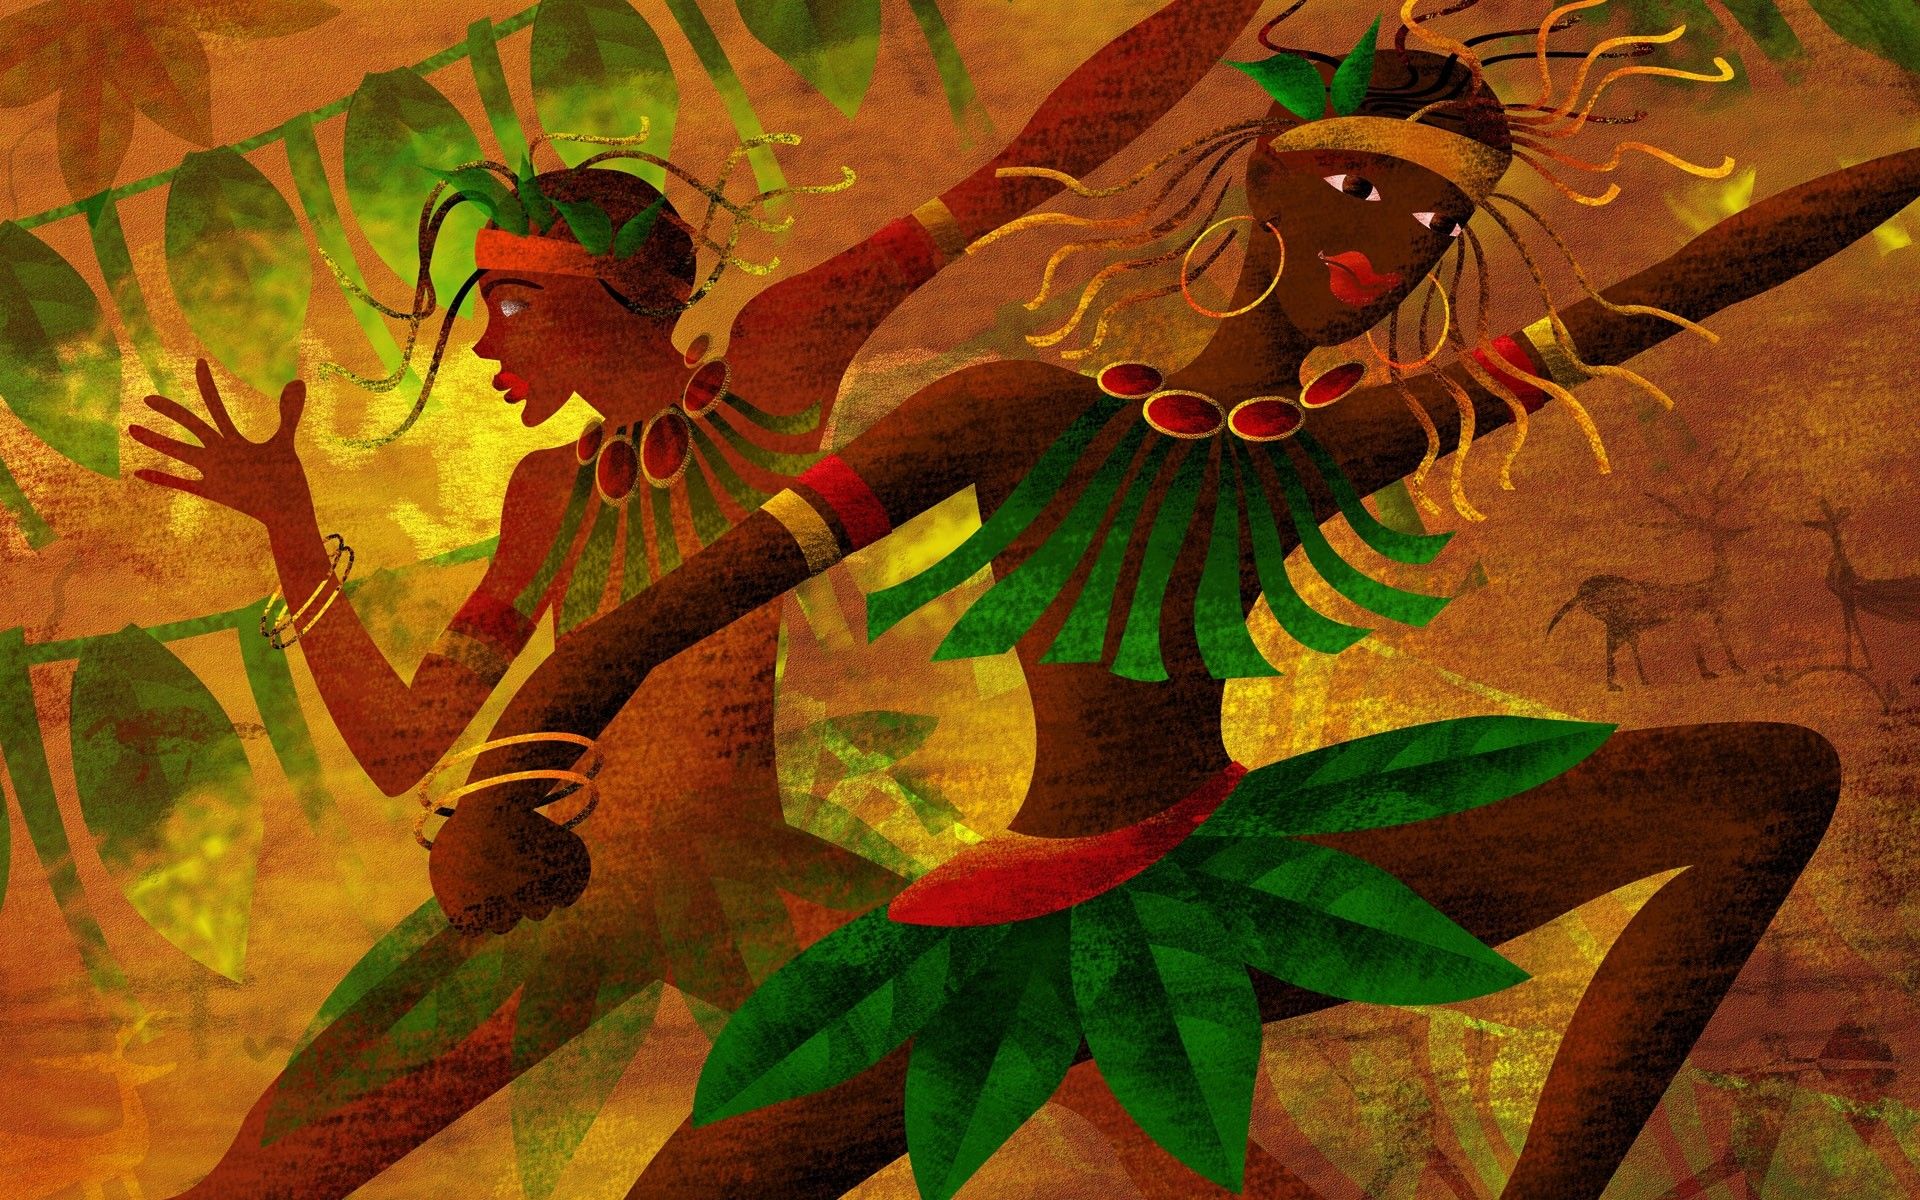 African Culture Wallpaper Free African Culture Background